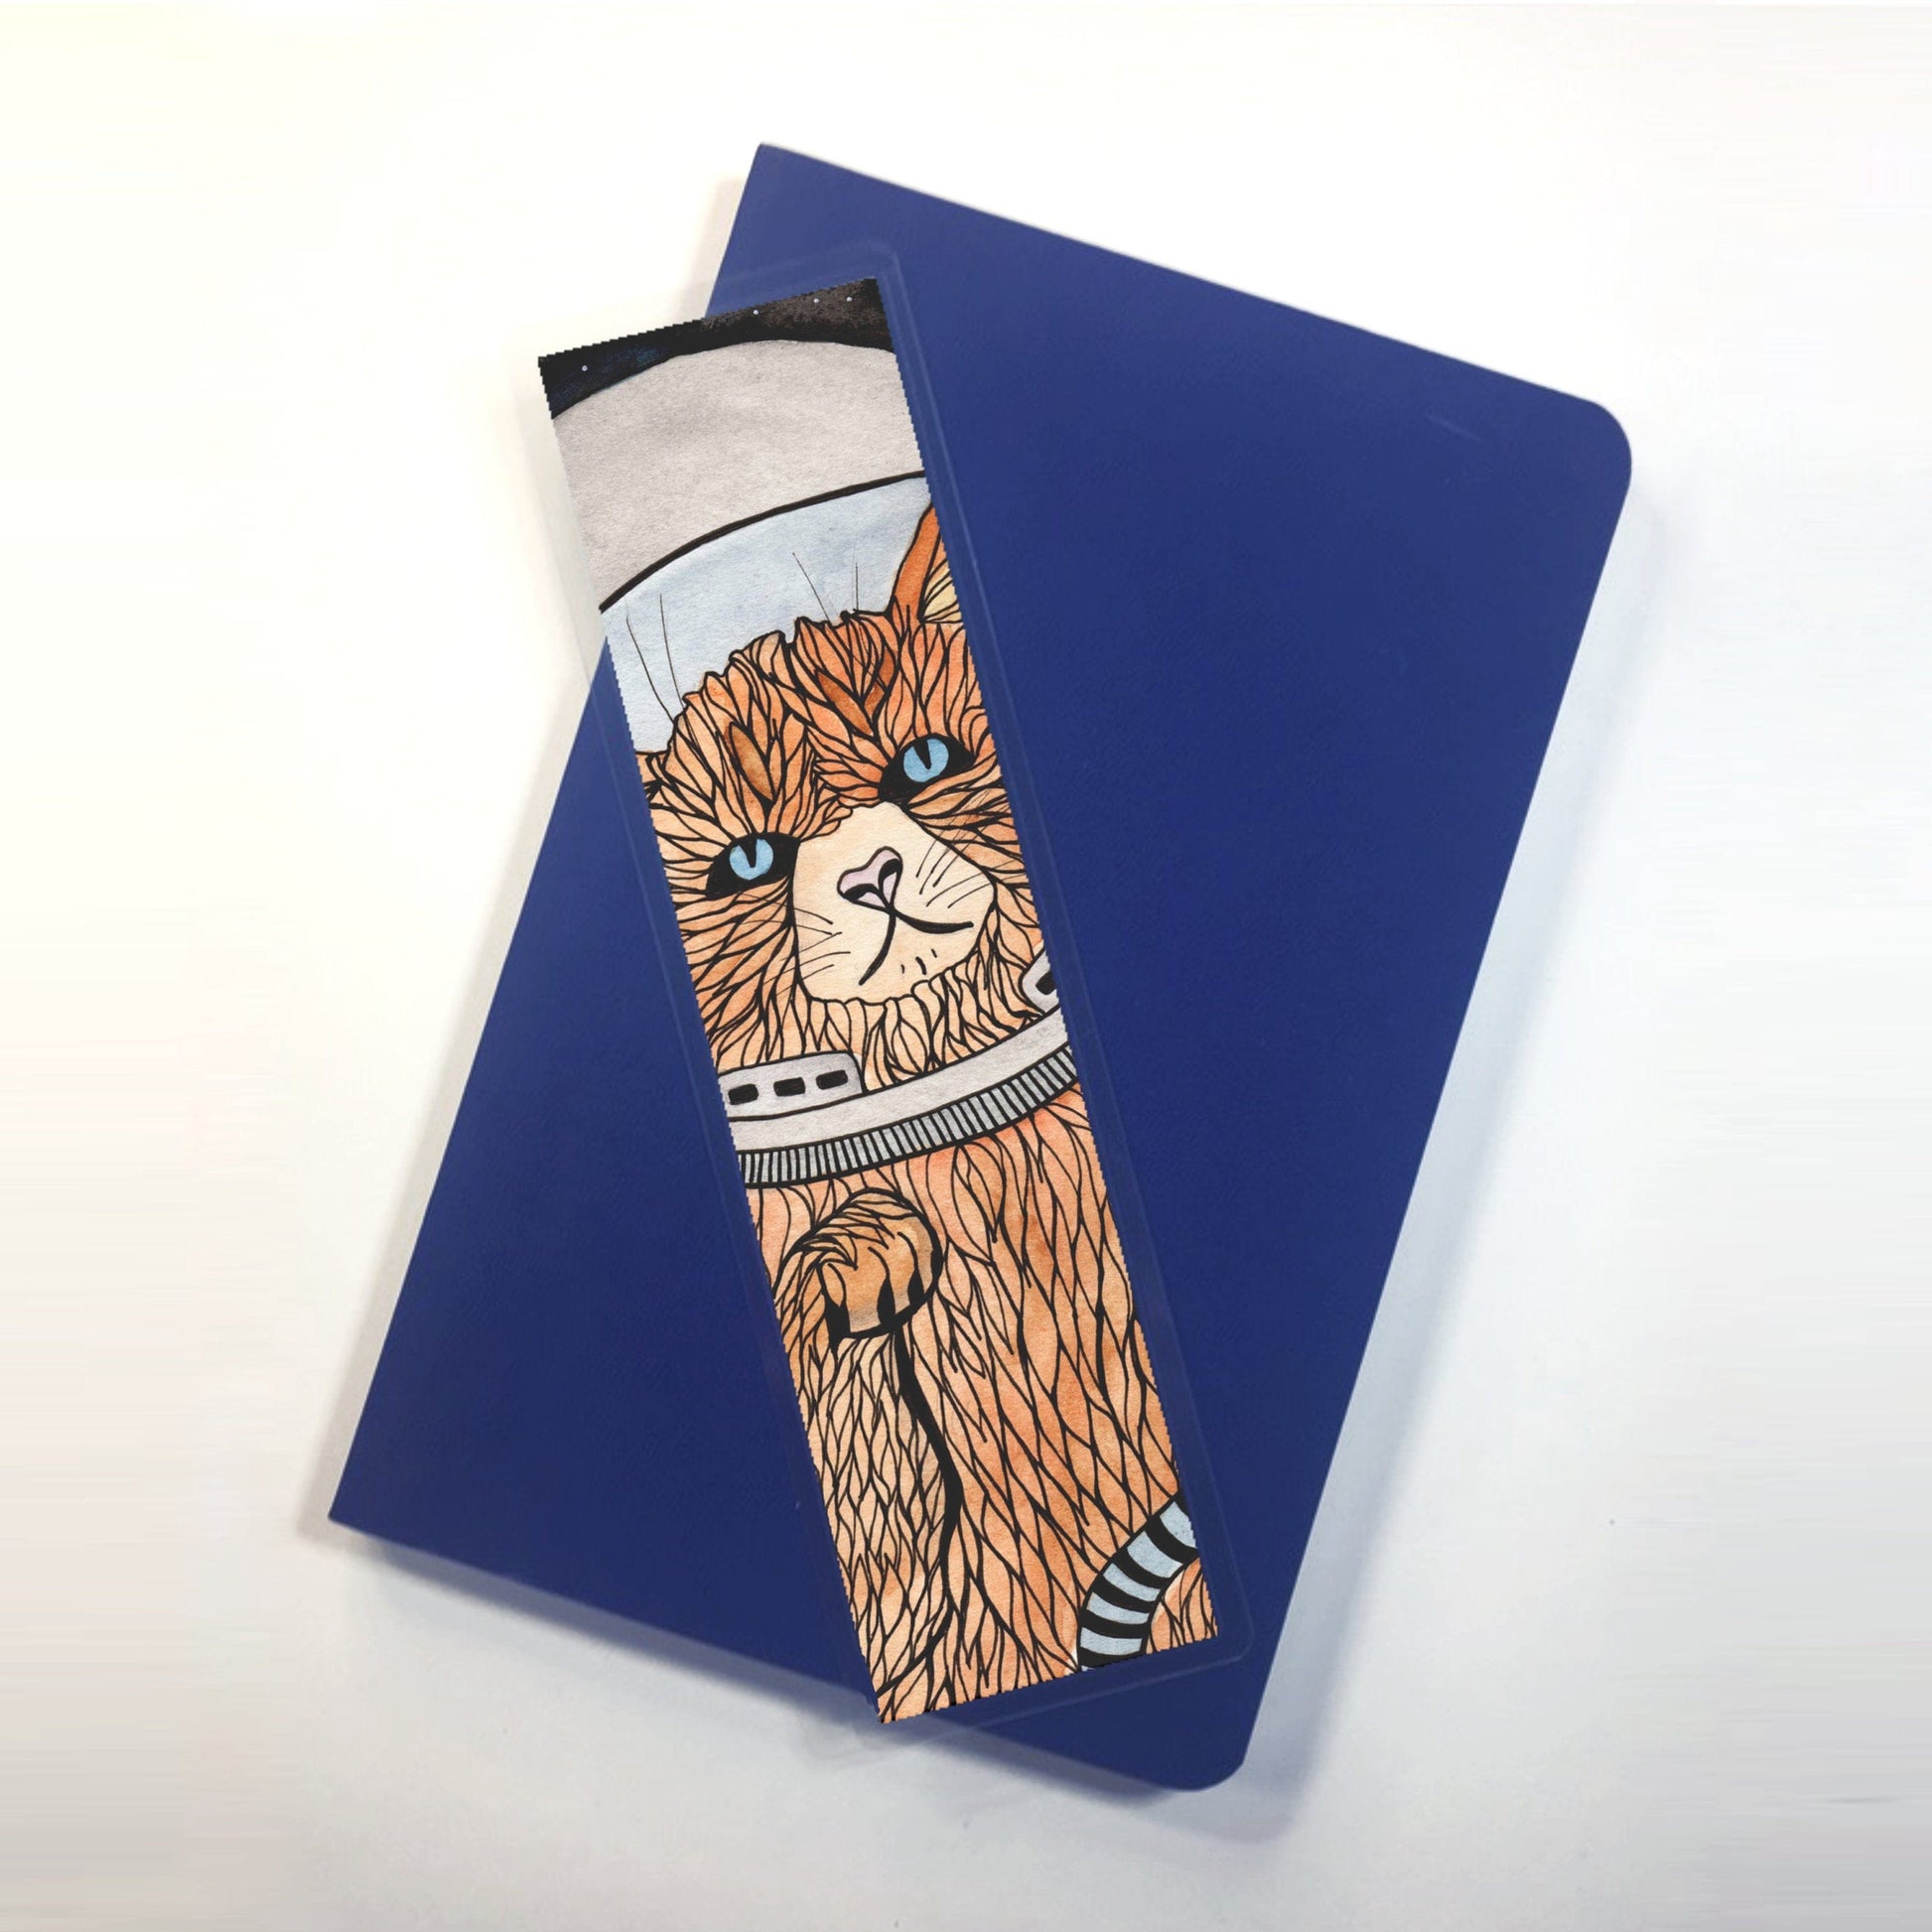 PinkPolish Design Bookmarks "Space Kitty", 2-Sided Bookmark